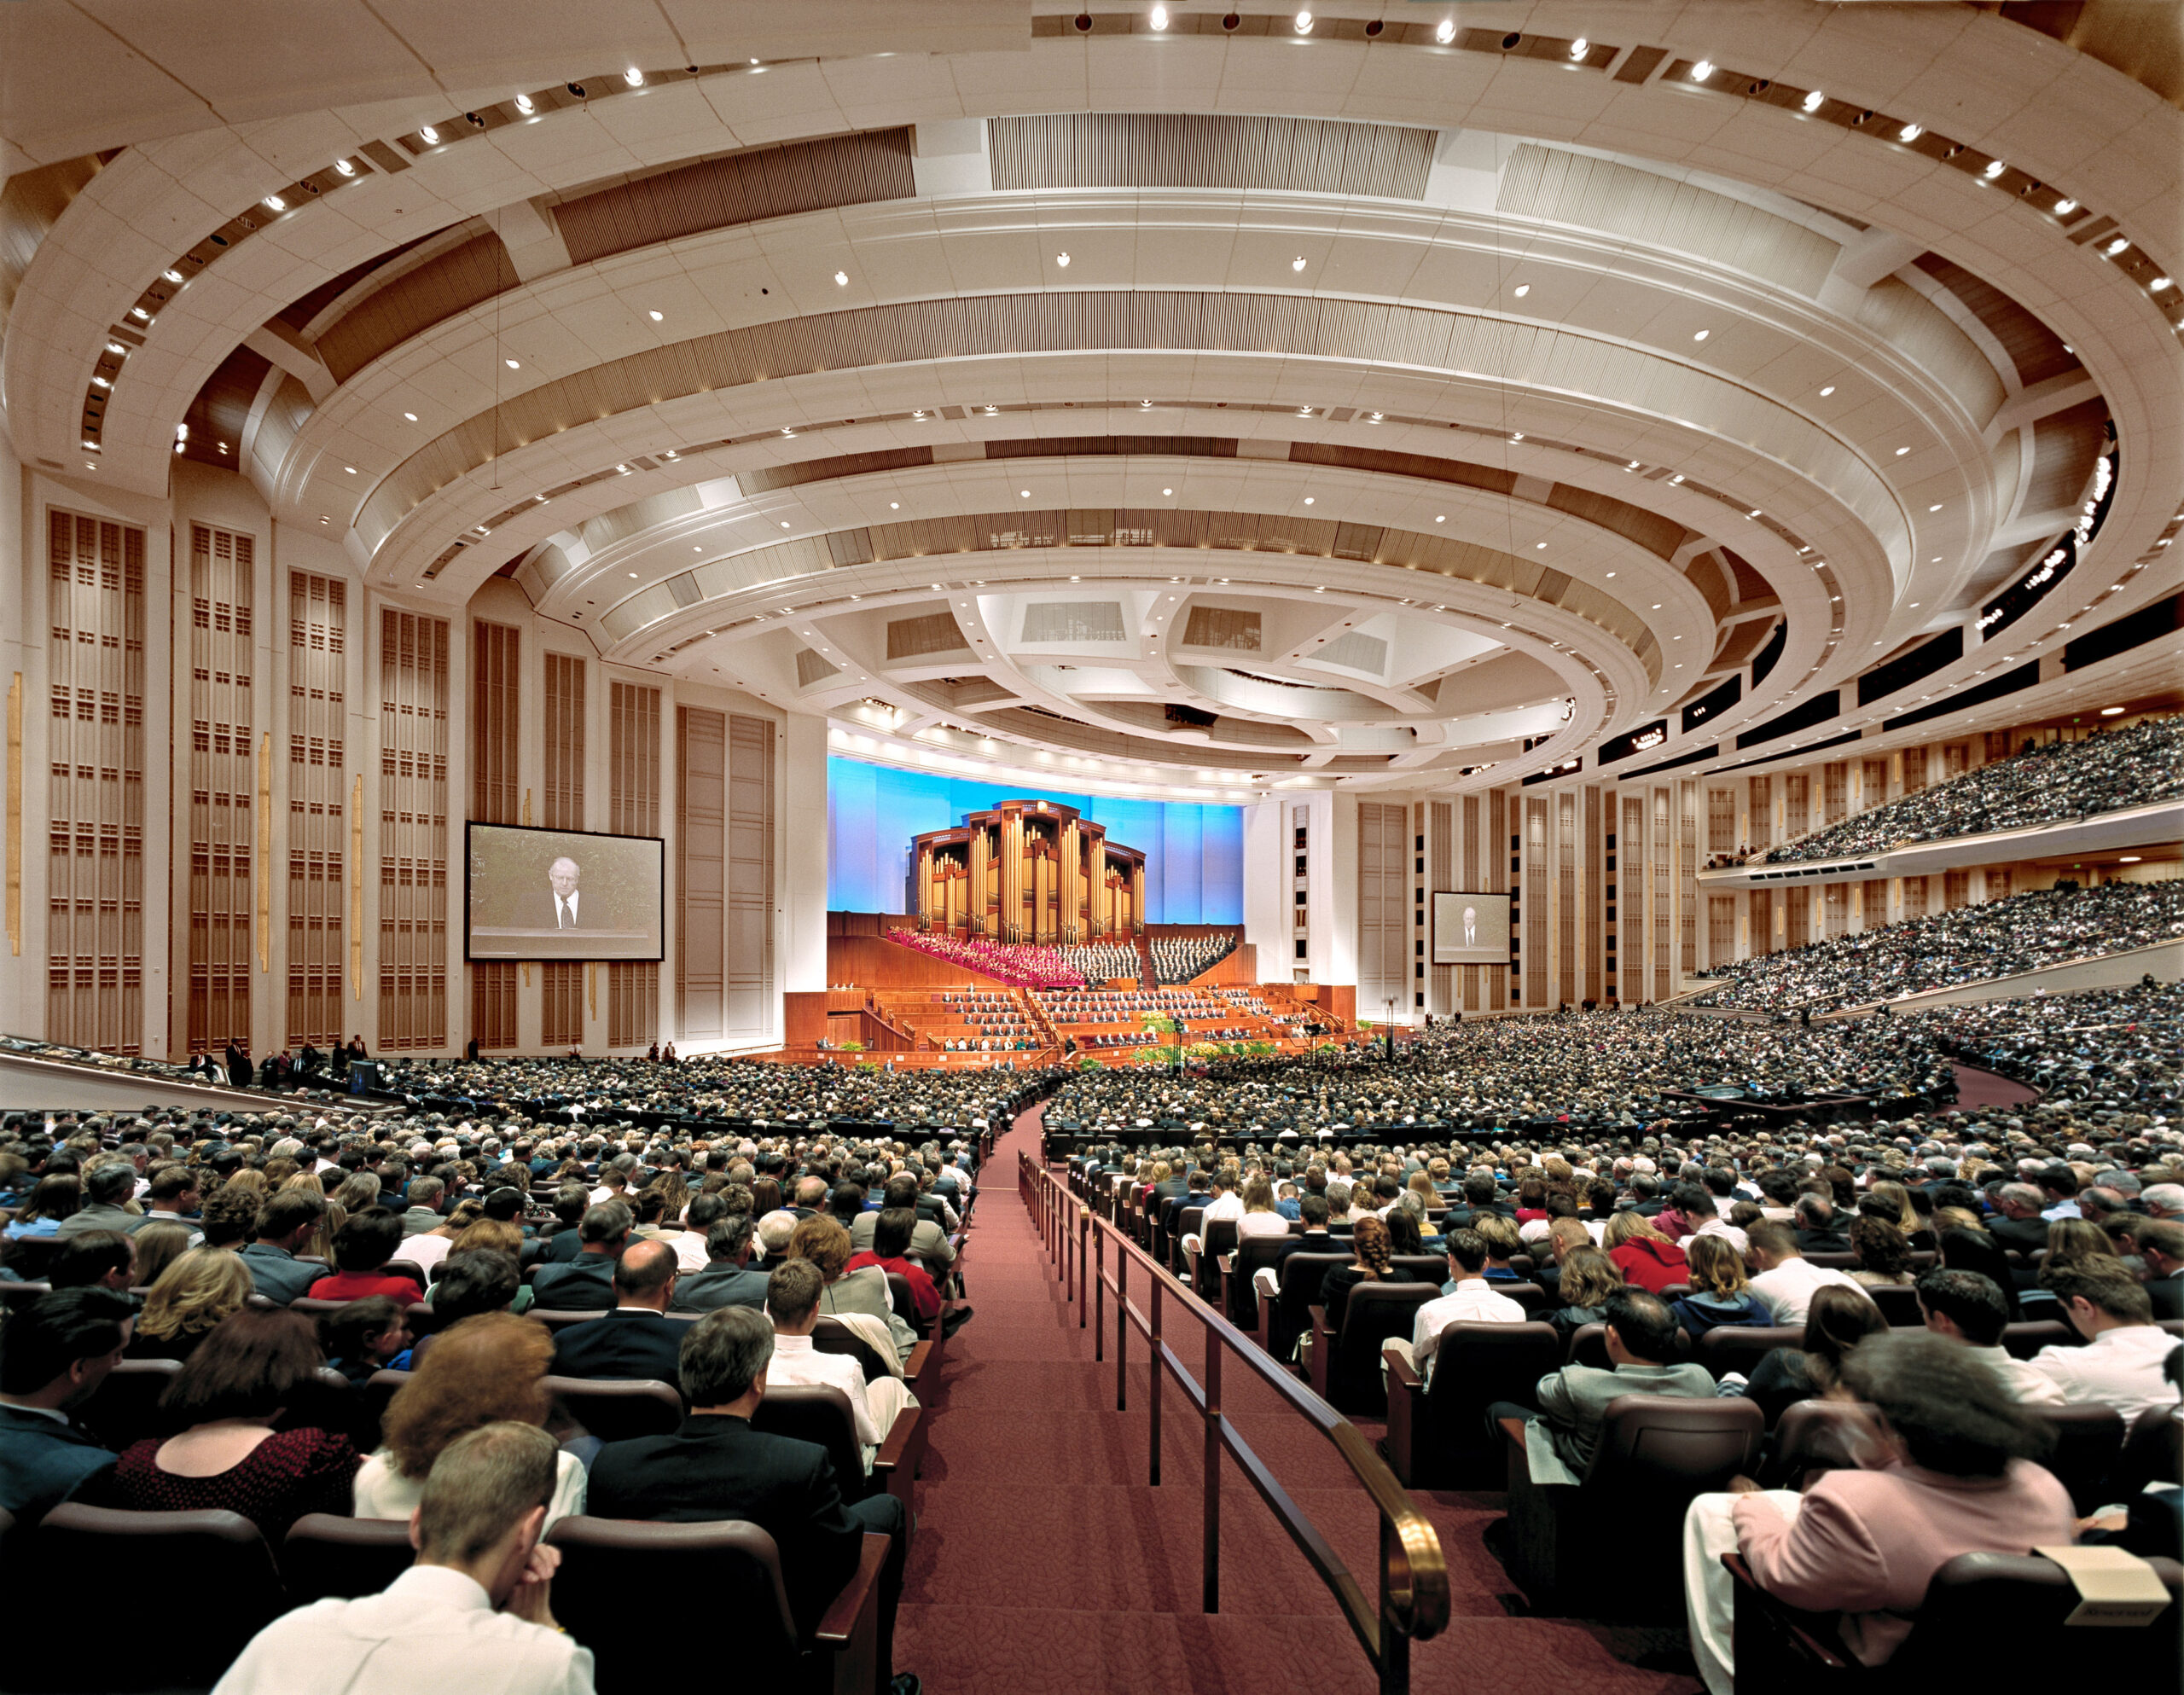 Conference Center for The Church of Jesus Christ of Latter-Day Saints